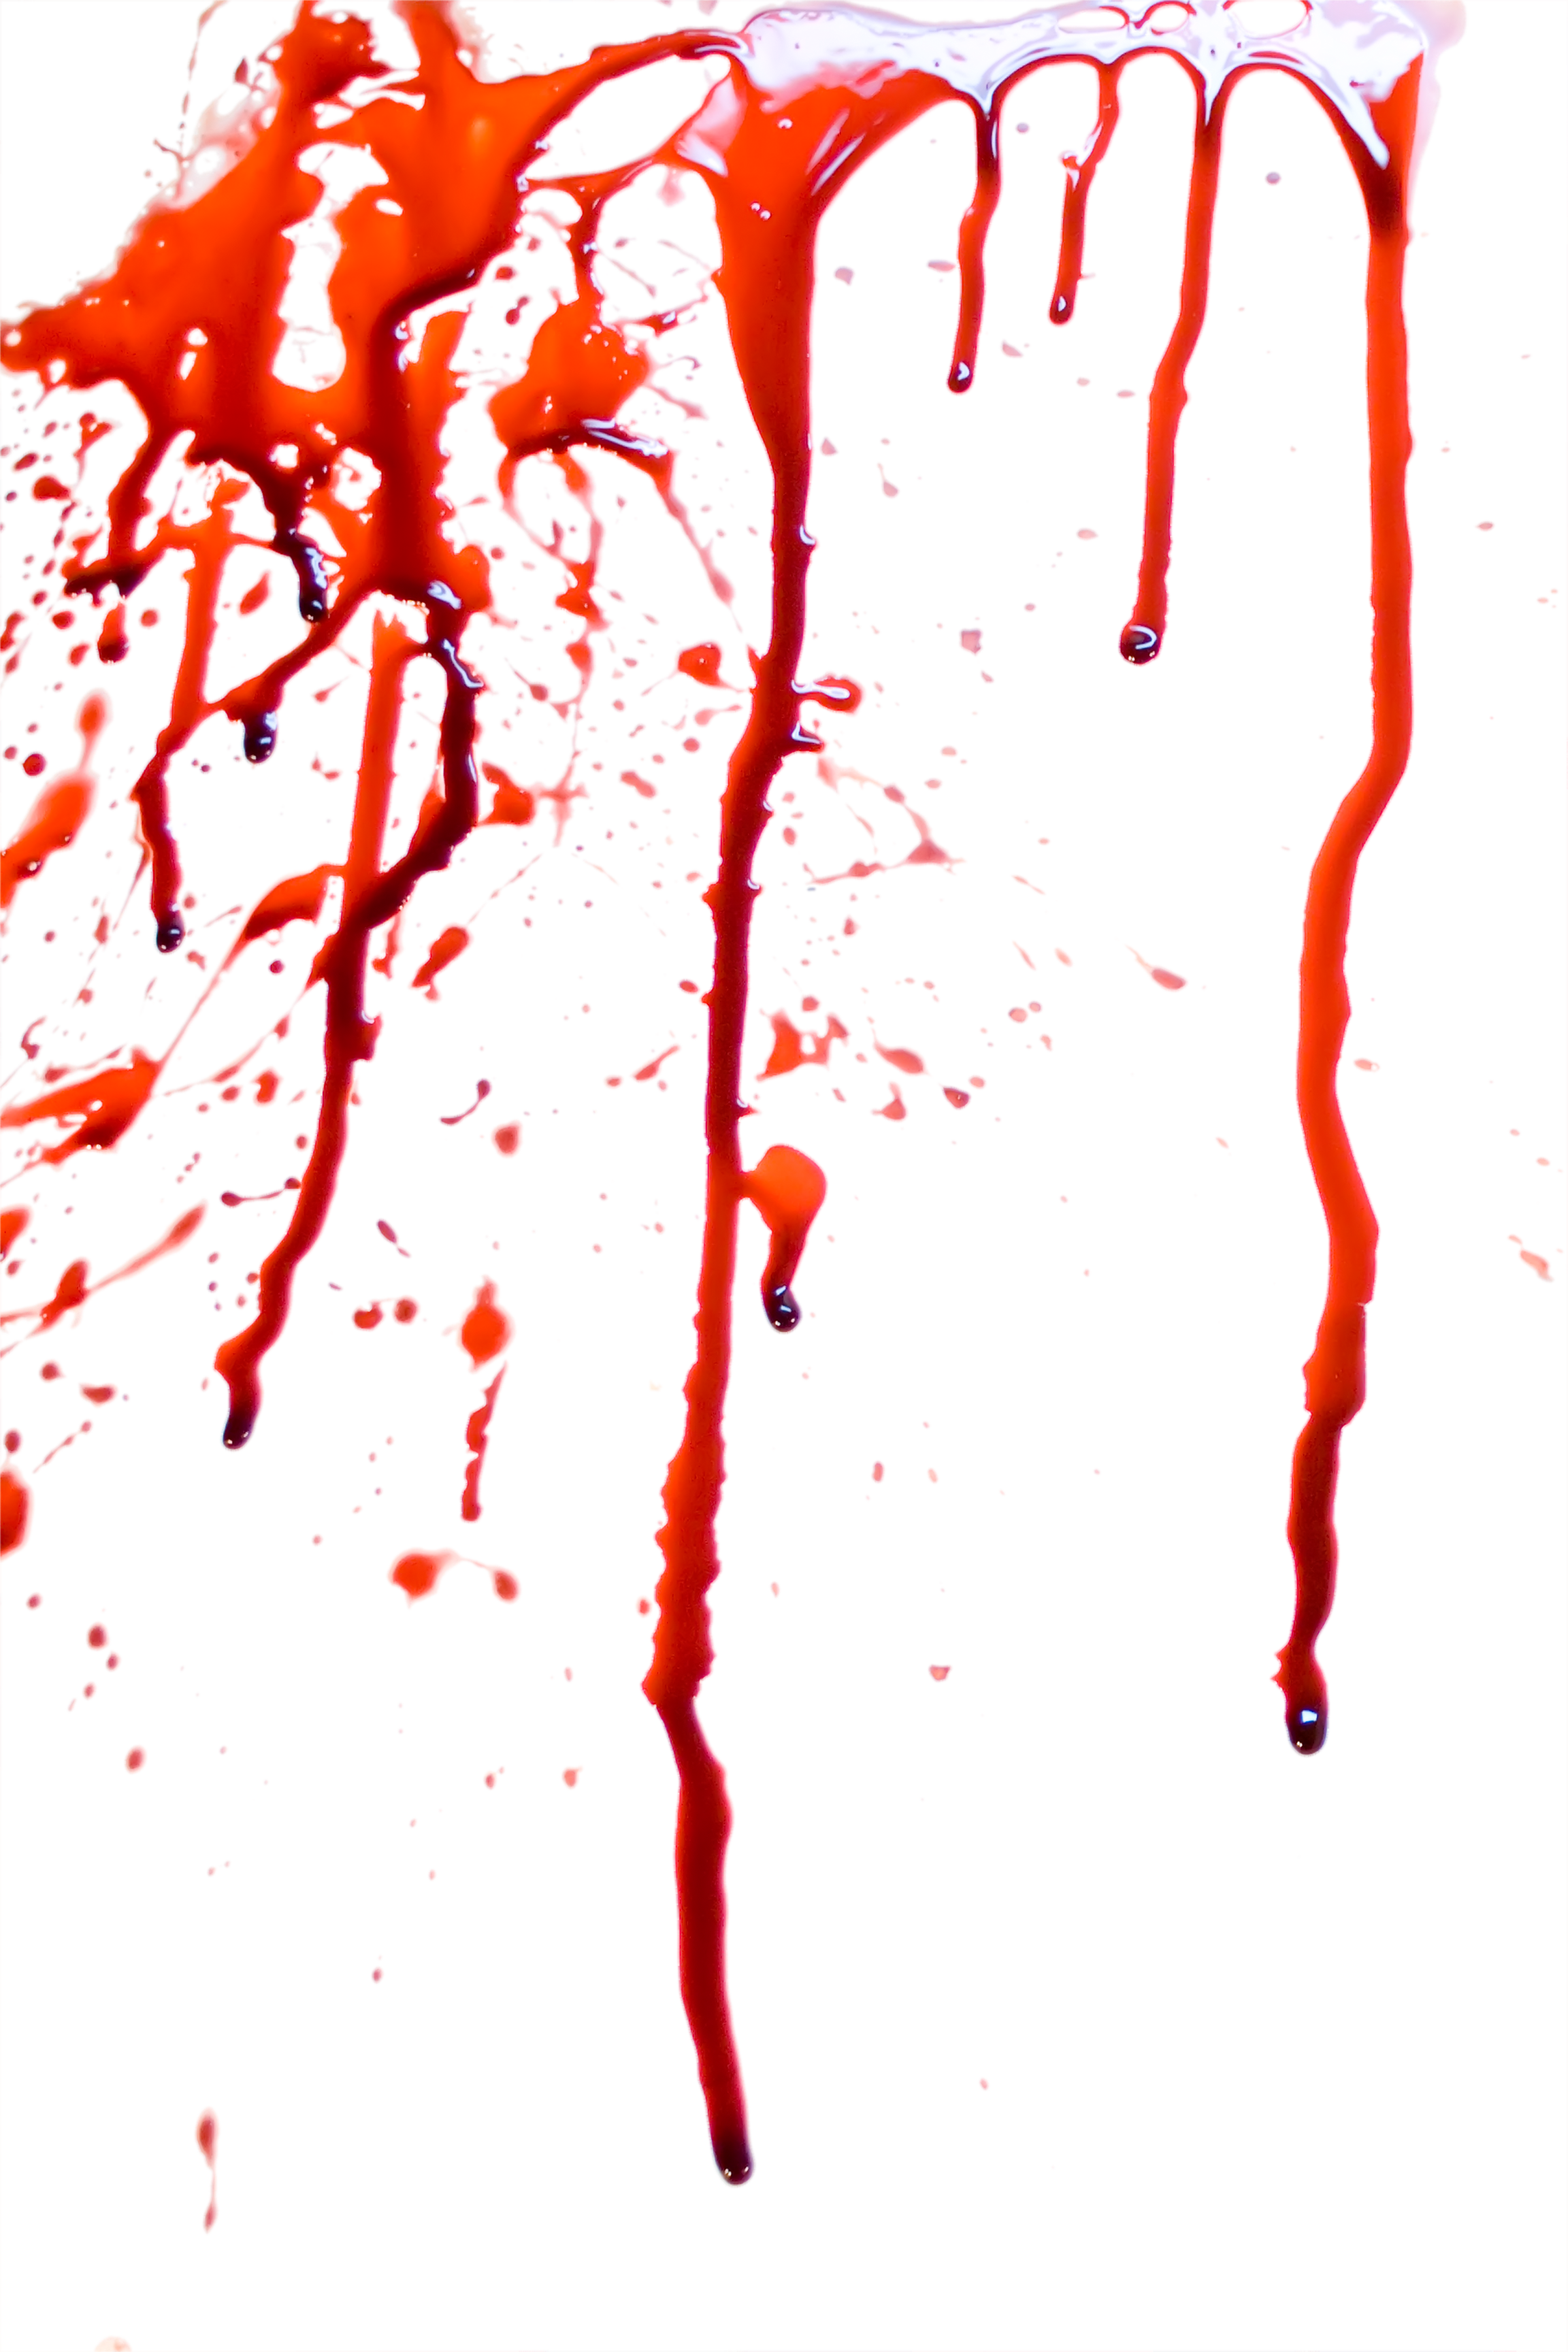 Dripping blood png. Images free download splashes